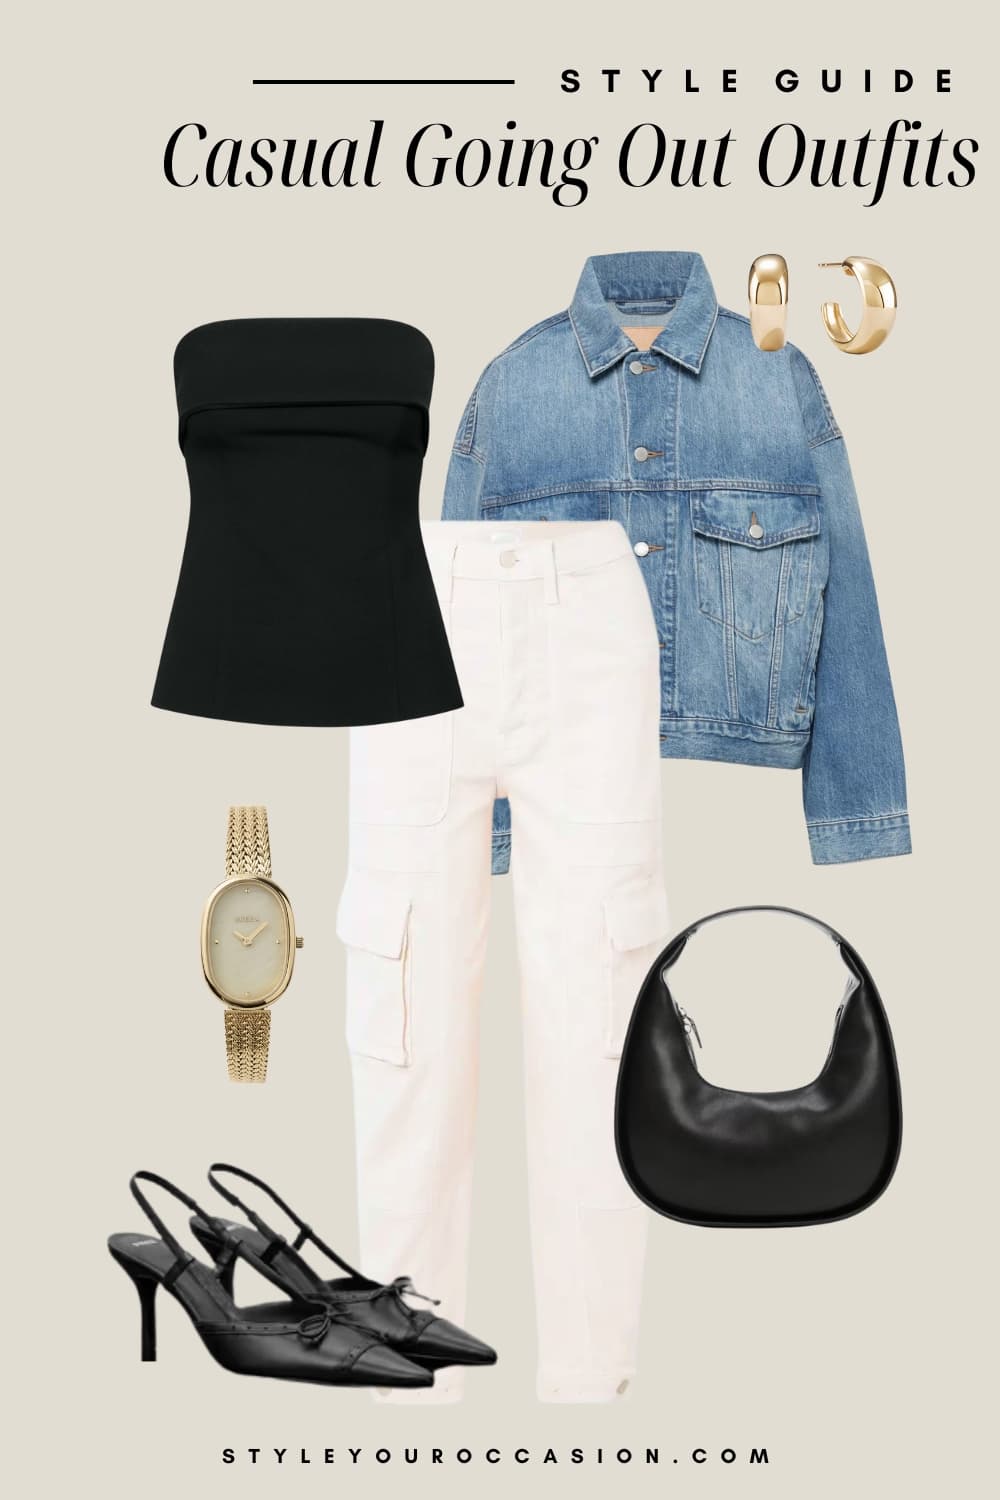 Outfit styling graphic of white cargo jeans, a black tube top, a light wash denim jacket, black slingback heels, gold jewelry and a black purse.